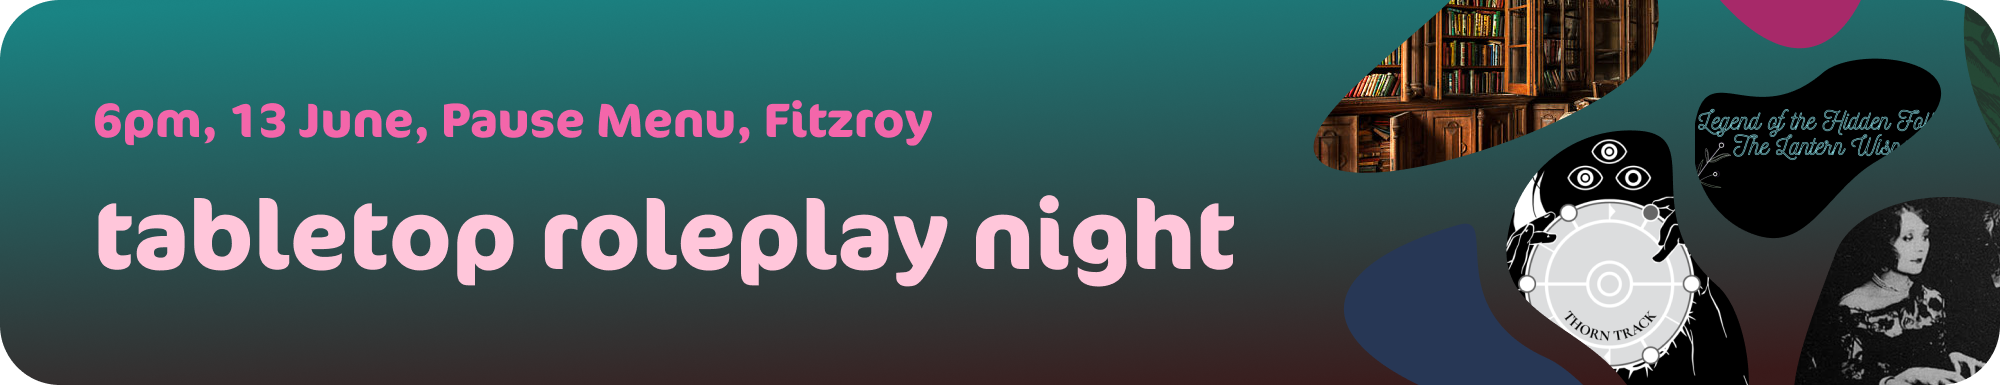 6pm, 13 June, Pause Menu, Fitzroy
Tabletop Roleplay Night